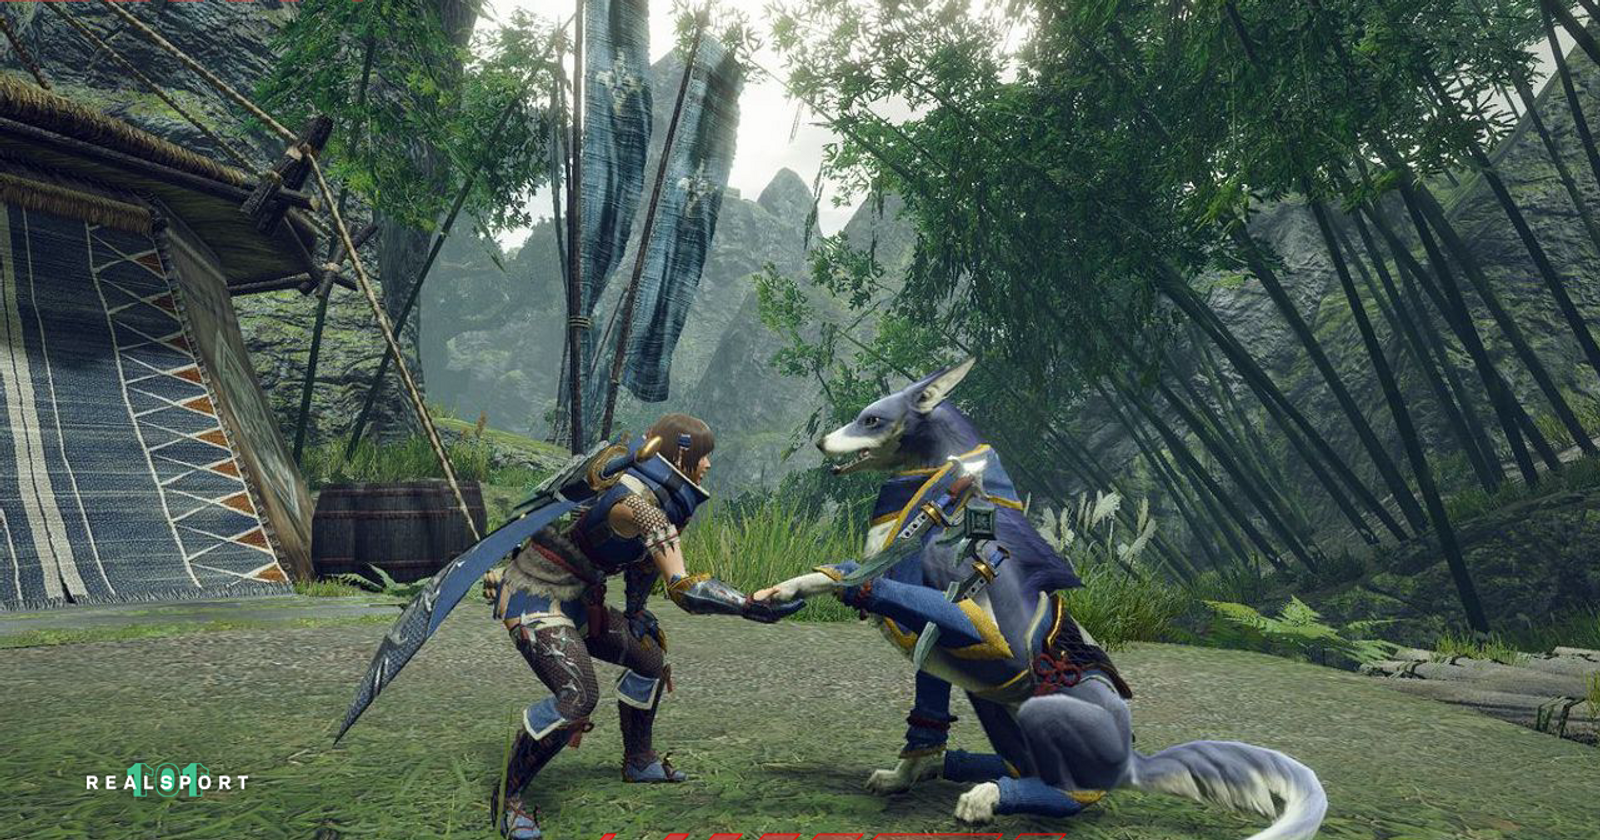 Monster Hunter Rise Won't Support Cross-Play or Cross-Save on Switch and PC